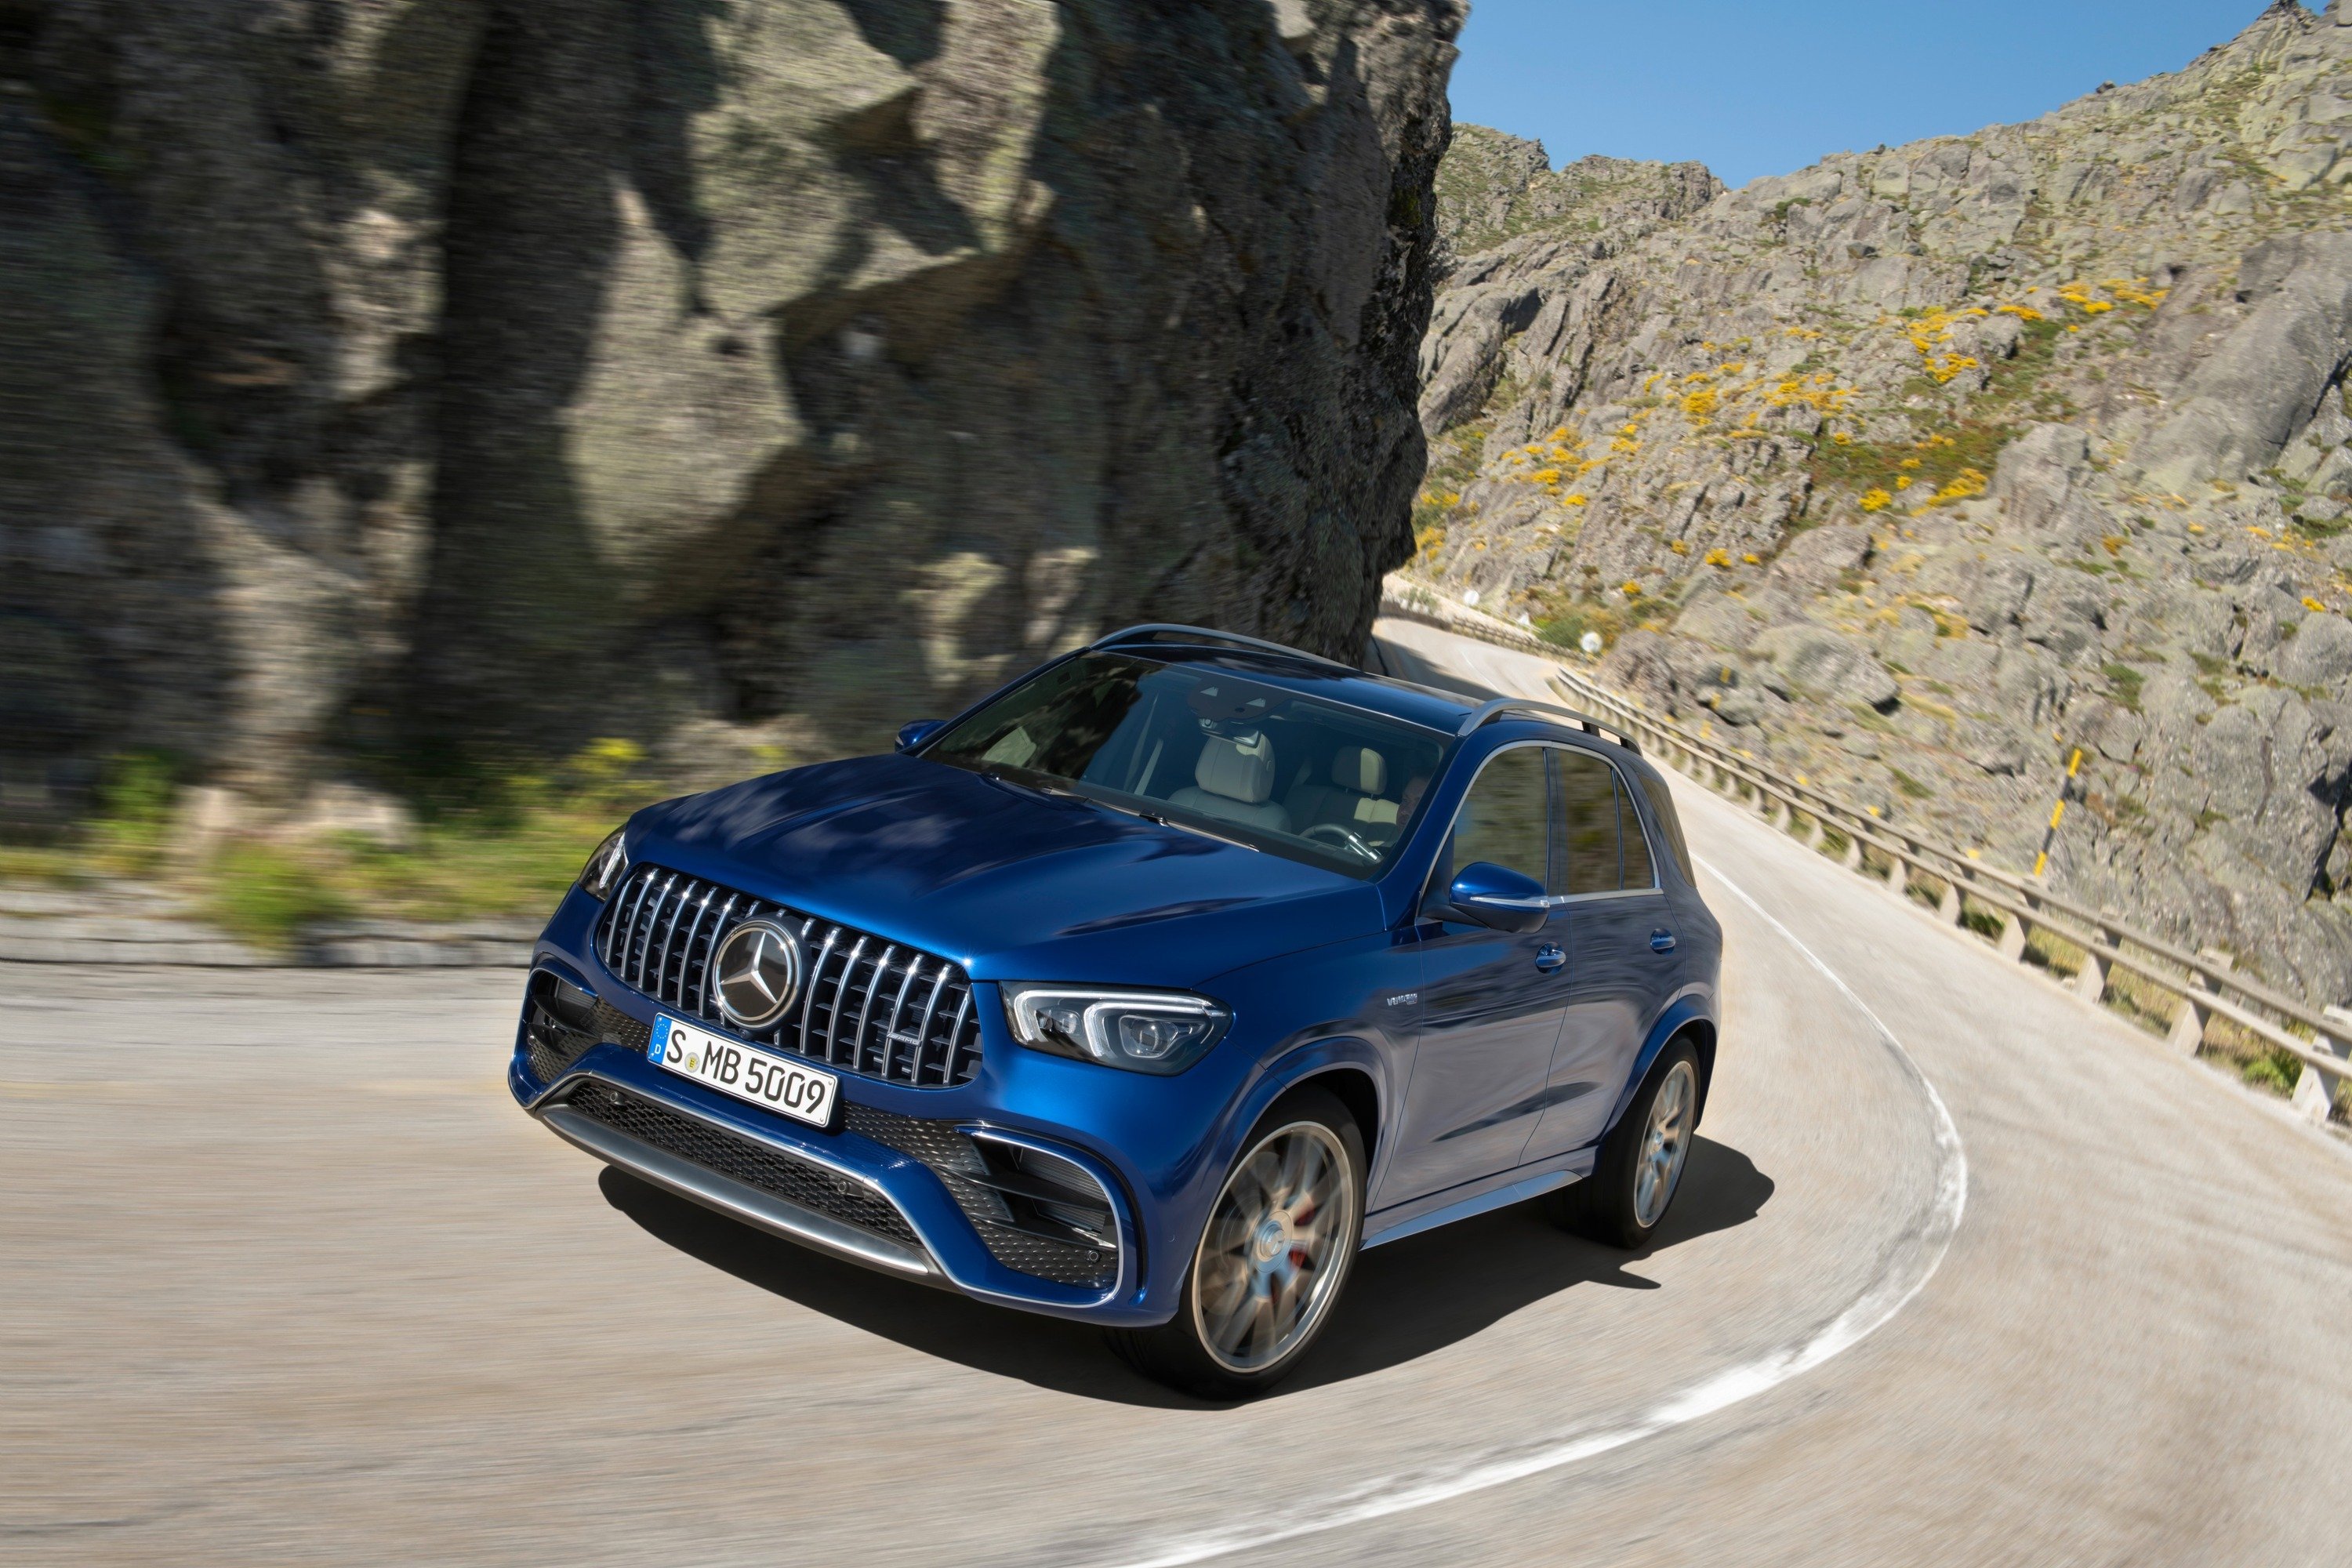 Mercedes-AMG GLE 63 S e GLS 63, debutto a Los Angeles